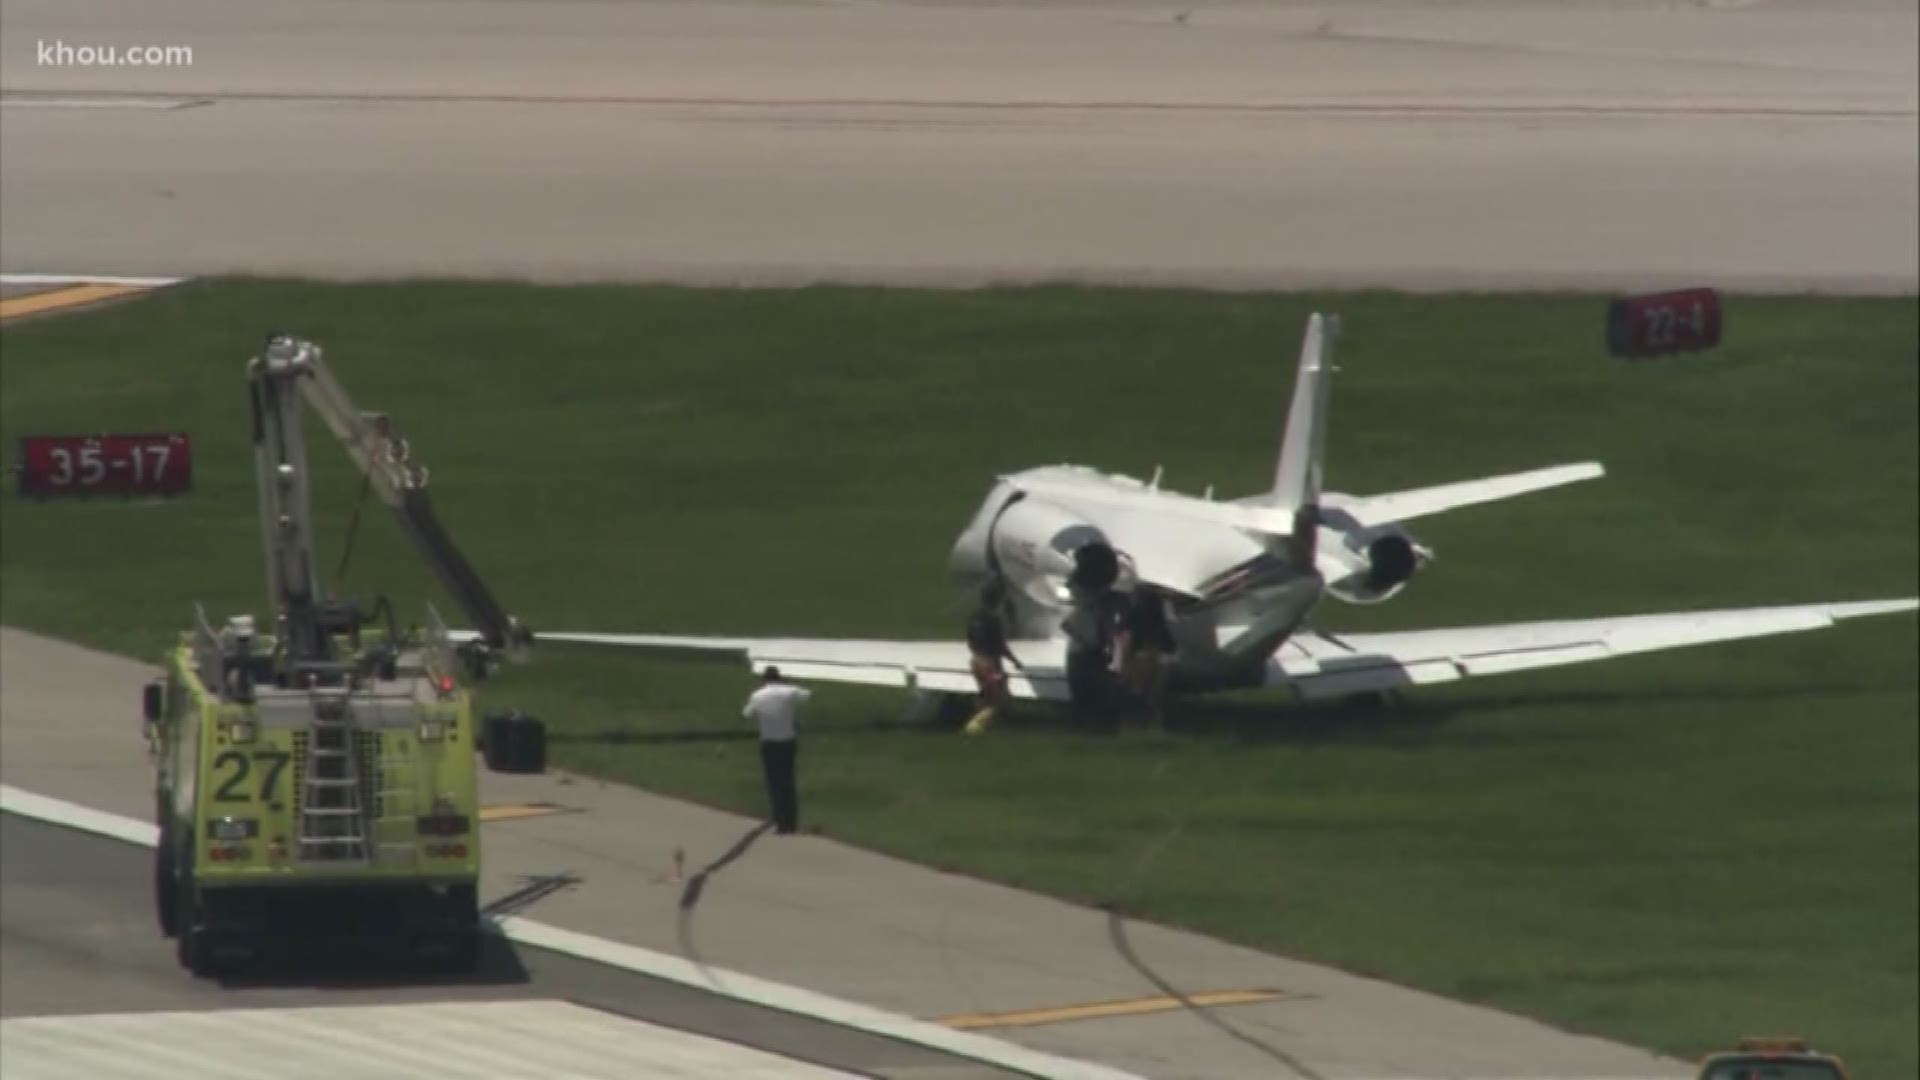 A small plane veered off the runway at Hobby Airport after it lost its brakes. One person suffered minor injuries.